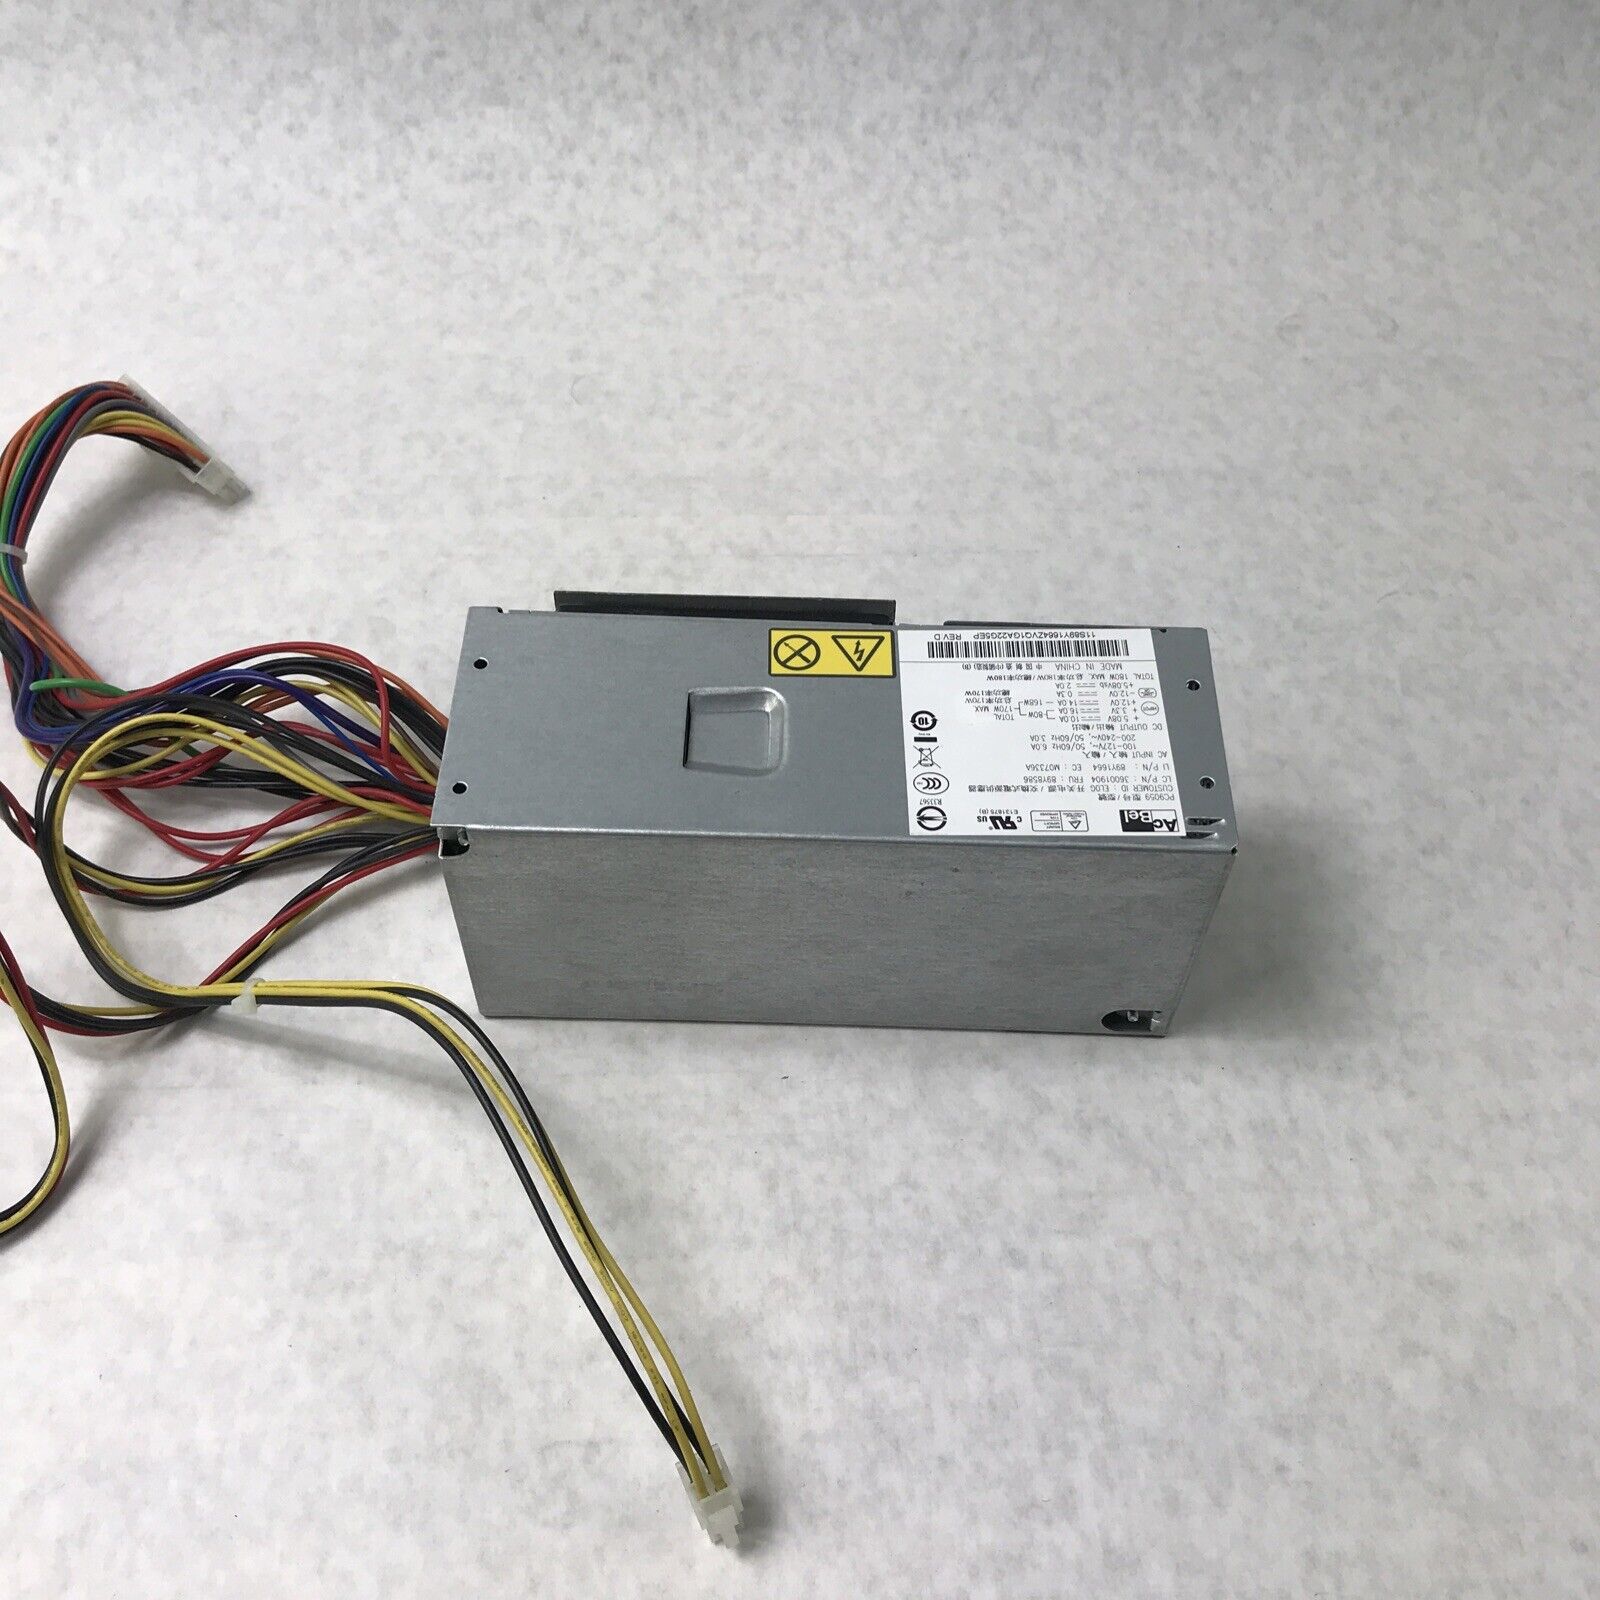 AcBel PC9059 60Hz 240V 6.0A 180W Power Supply 89Y1664 (Tested and Working)